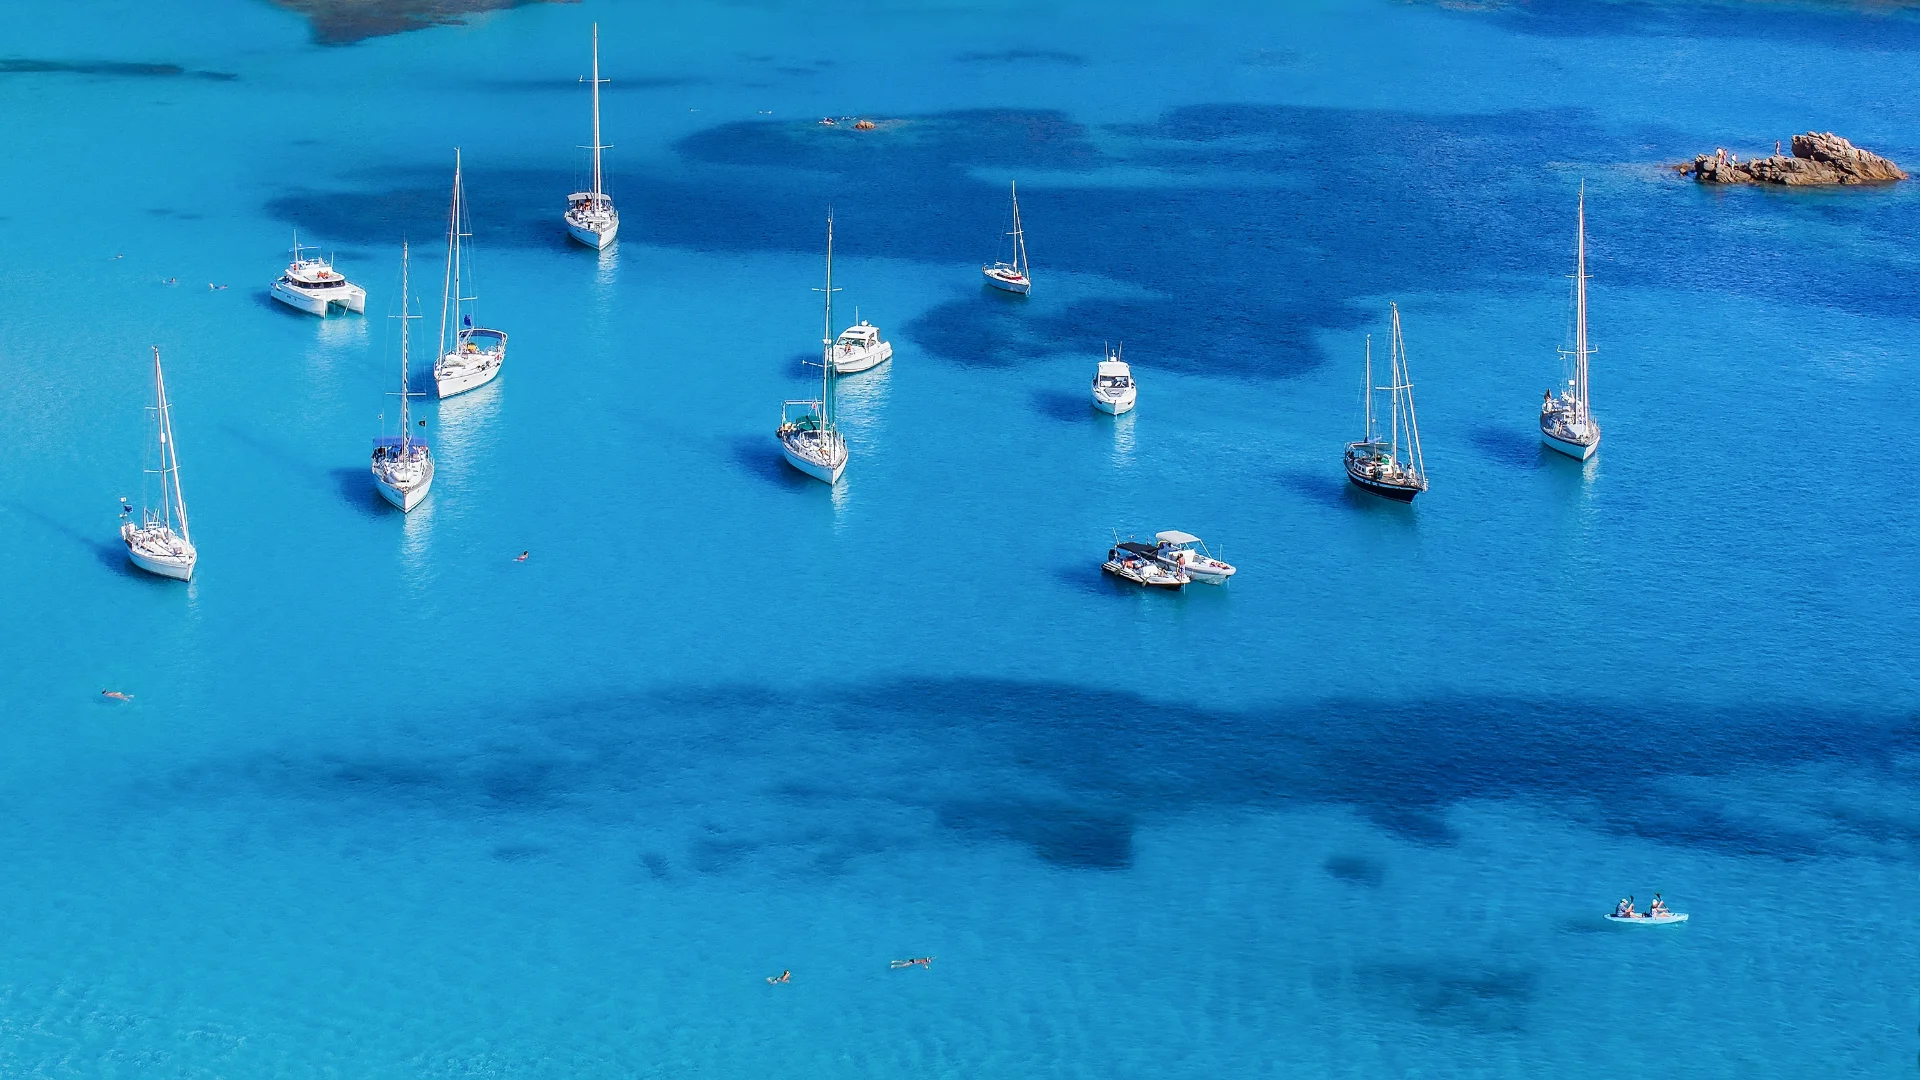 Aerial view of a serene turquoise blue ocean with several sailboats and yachts anchored, casting gentle shadows on the water. The image exudes tranquility with vibrant, clear water and a few swimmers visible near the boats.